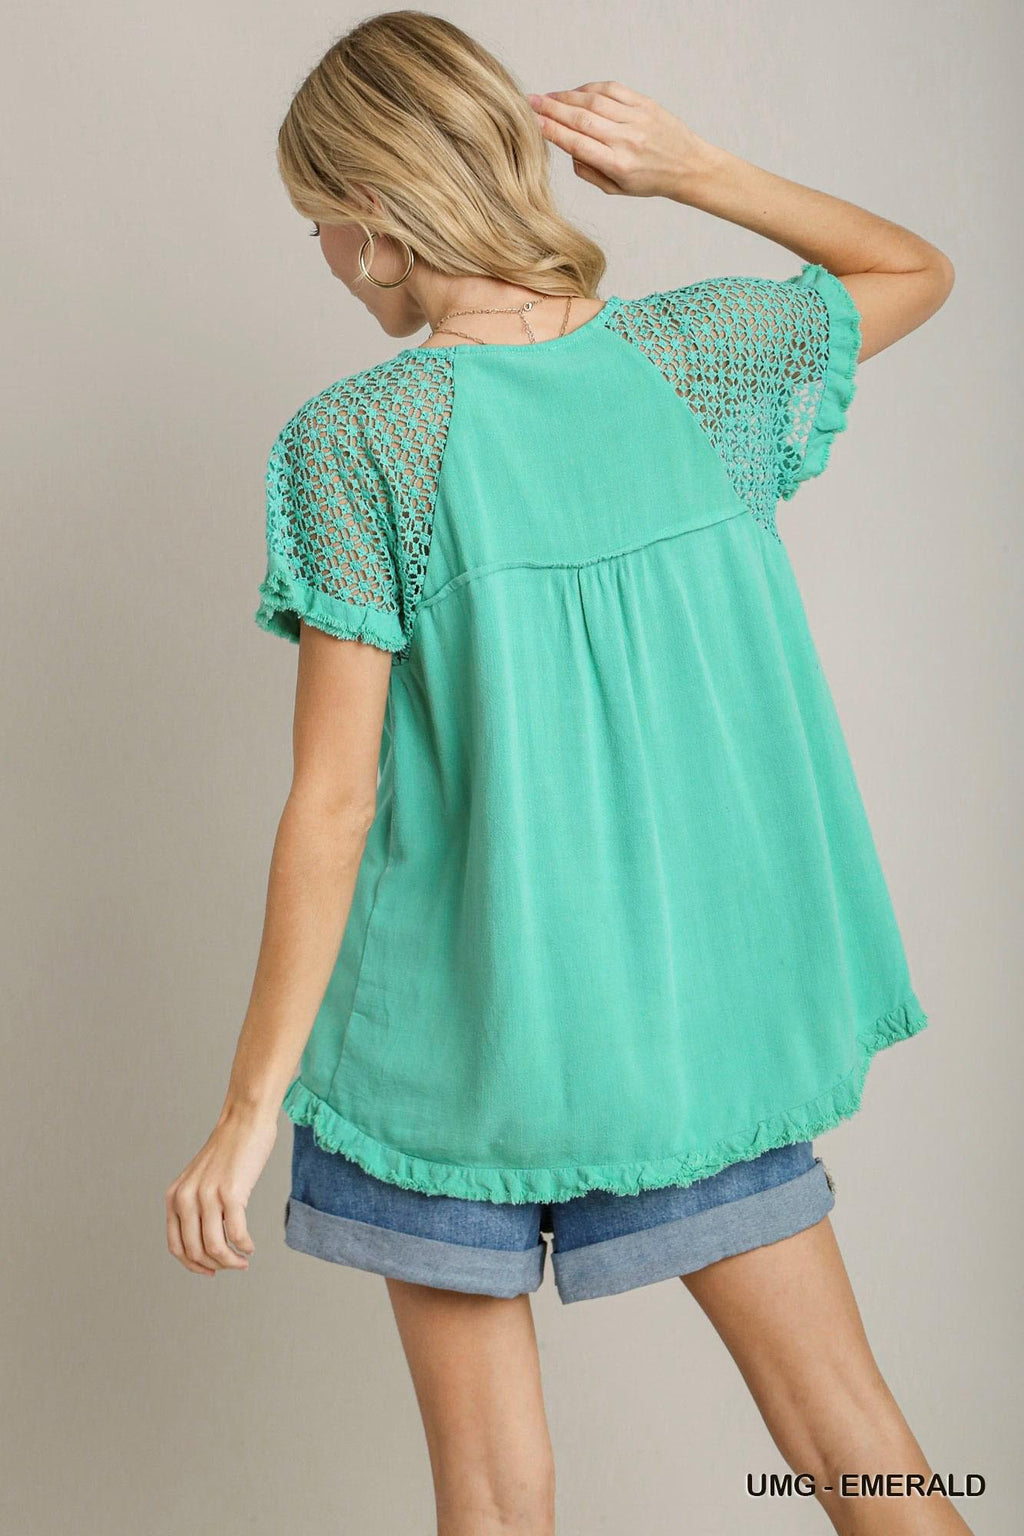 Emerald Floral Crochet Fringed Hem Top by Umgee